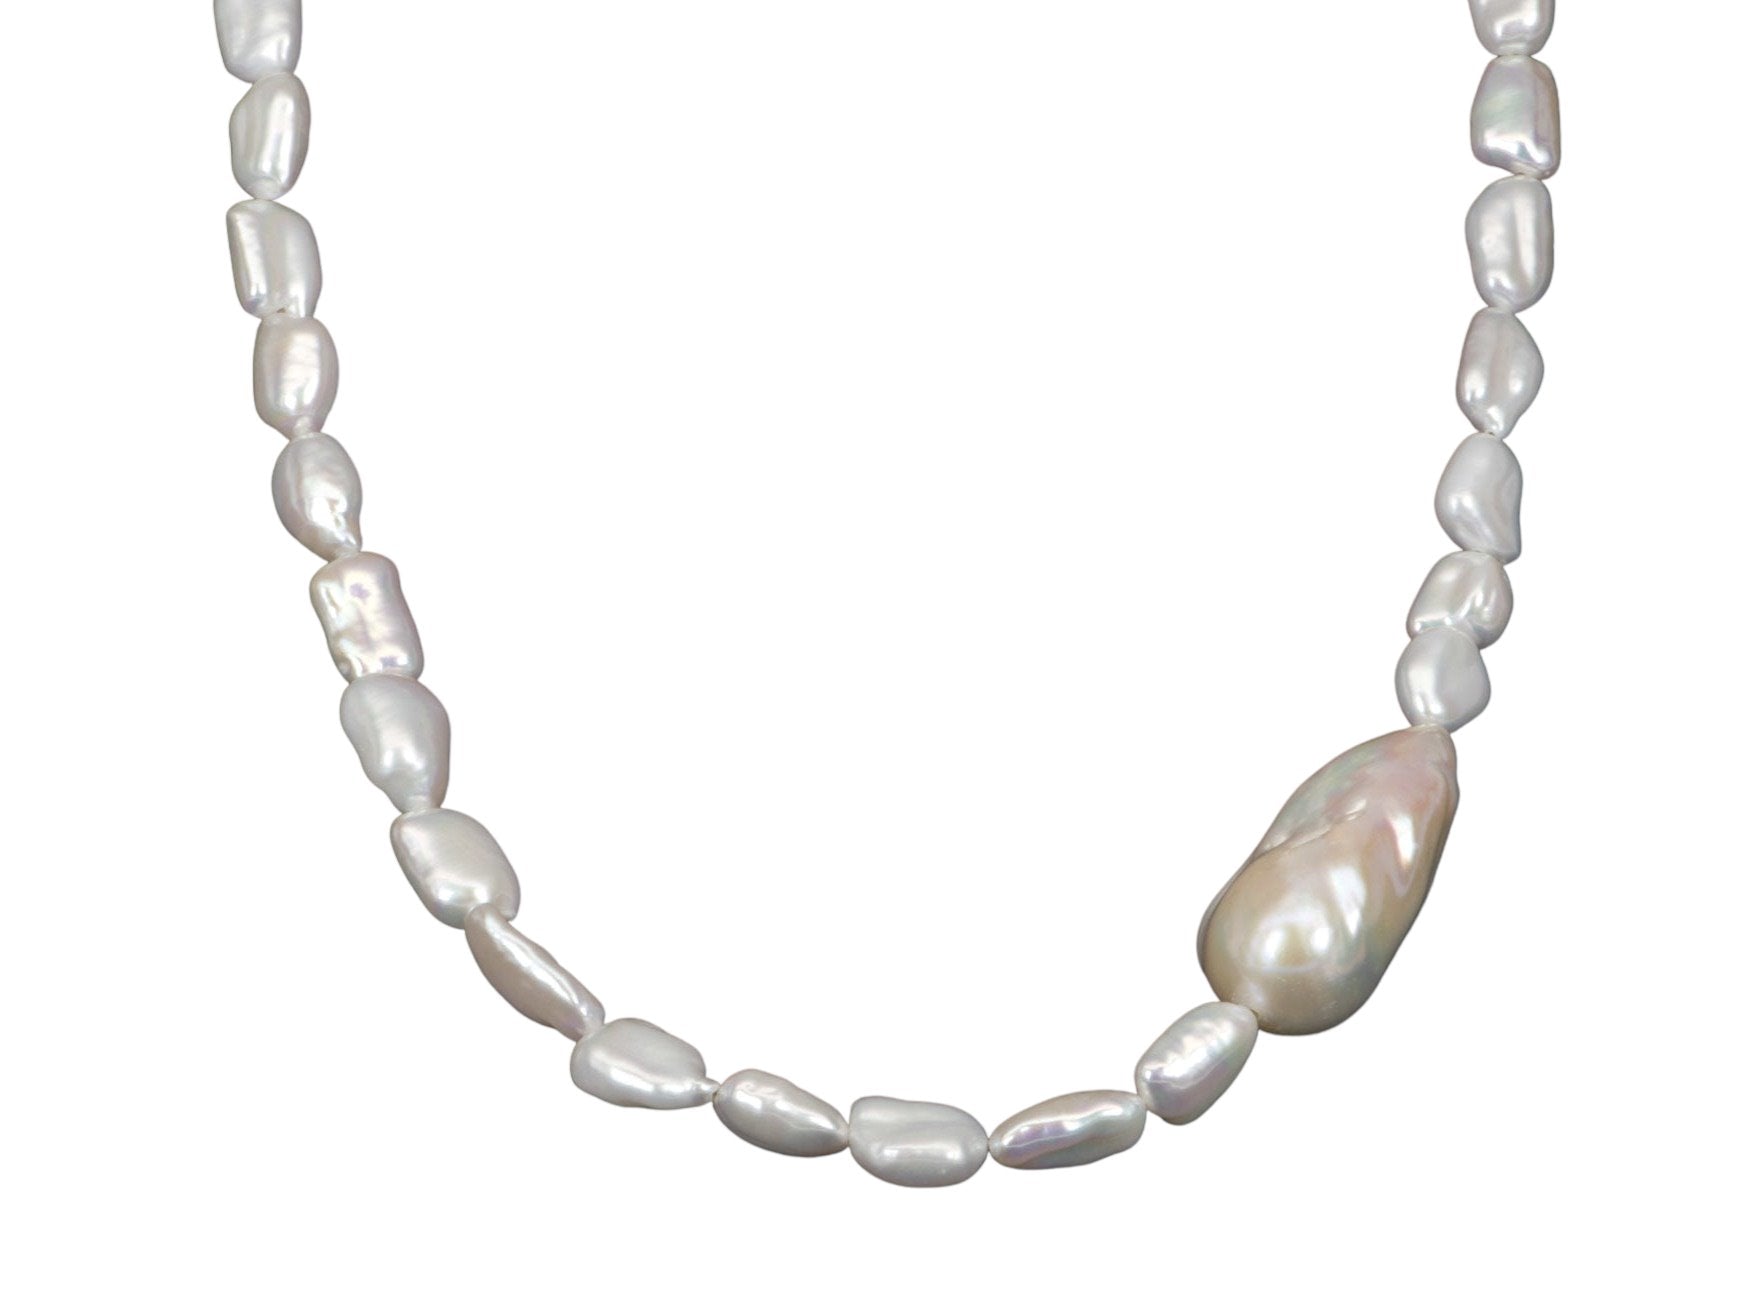 Unique and Natural Baroque Pearl Strand - Sizes 14-25mm